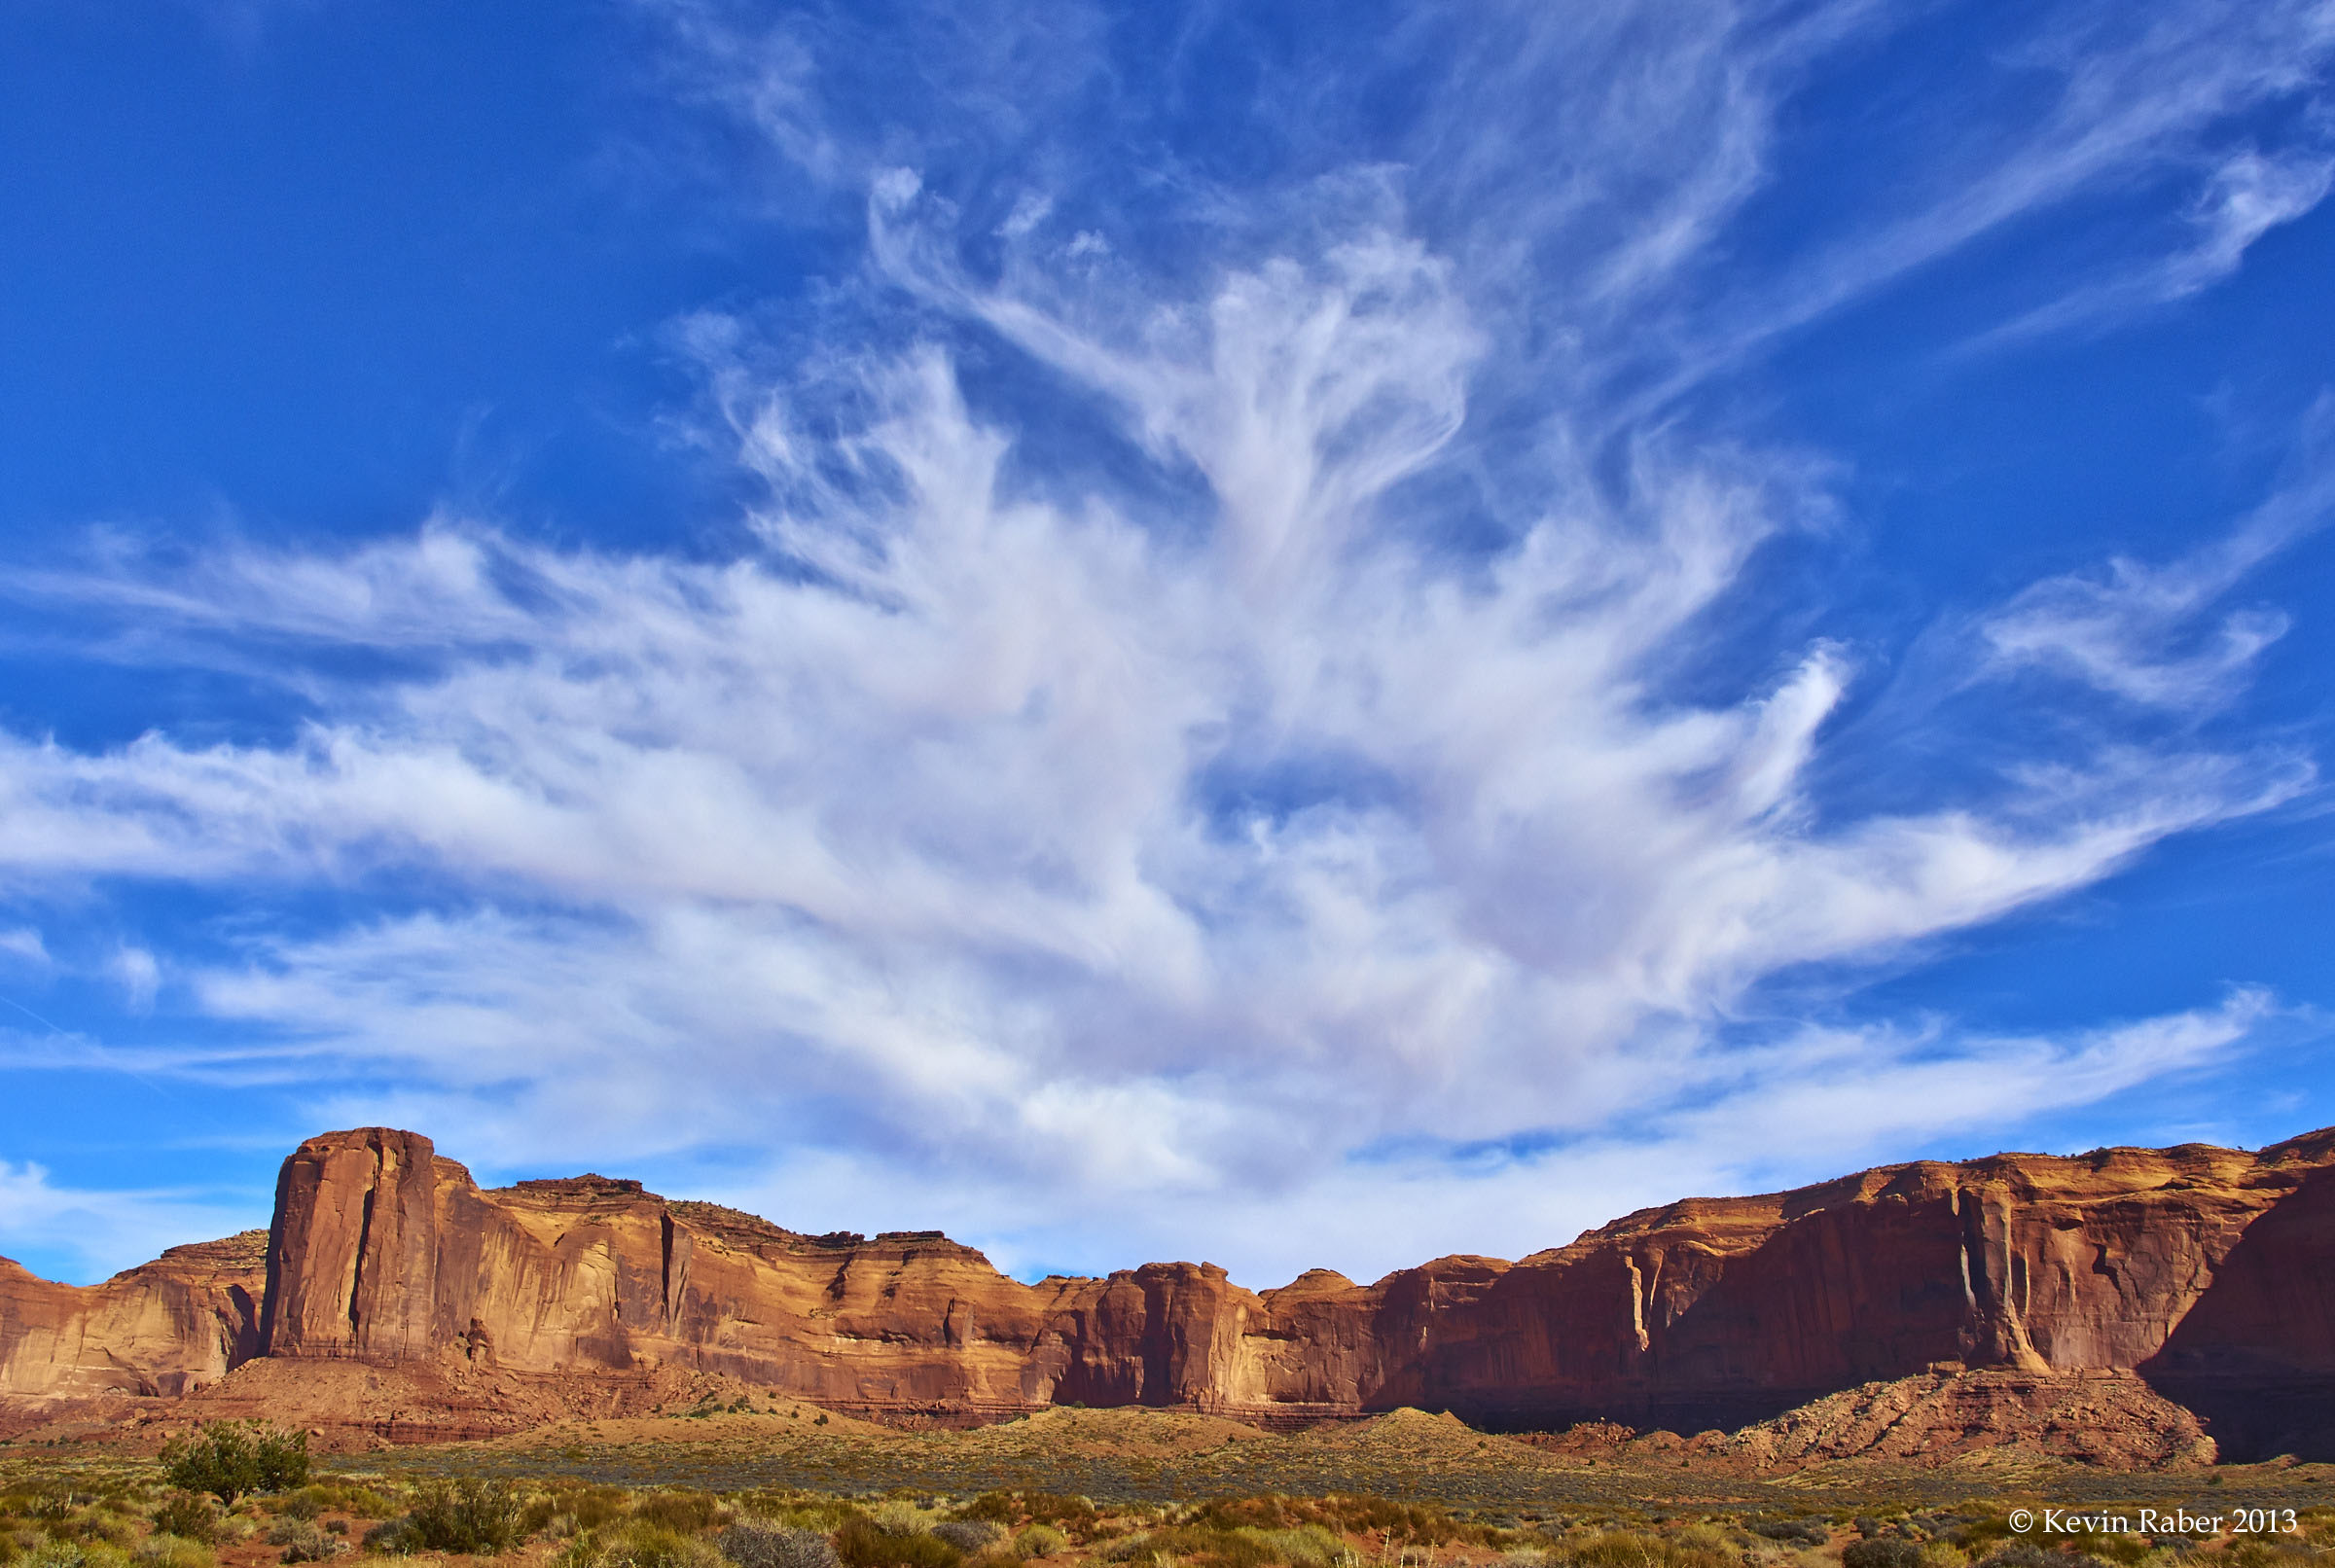 Big Sky in Monument Valley